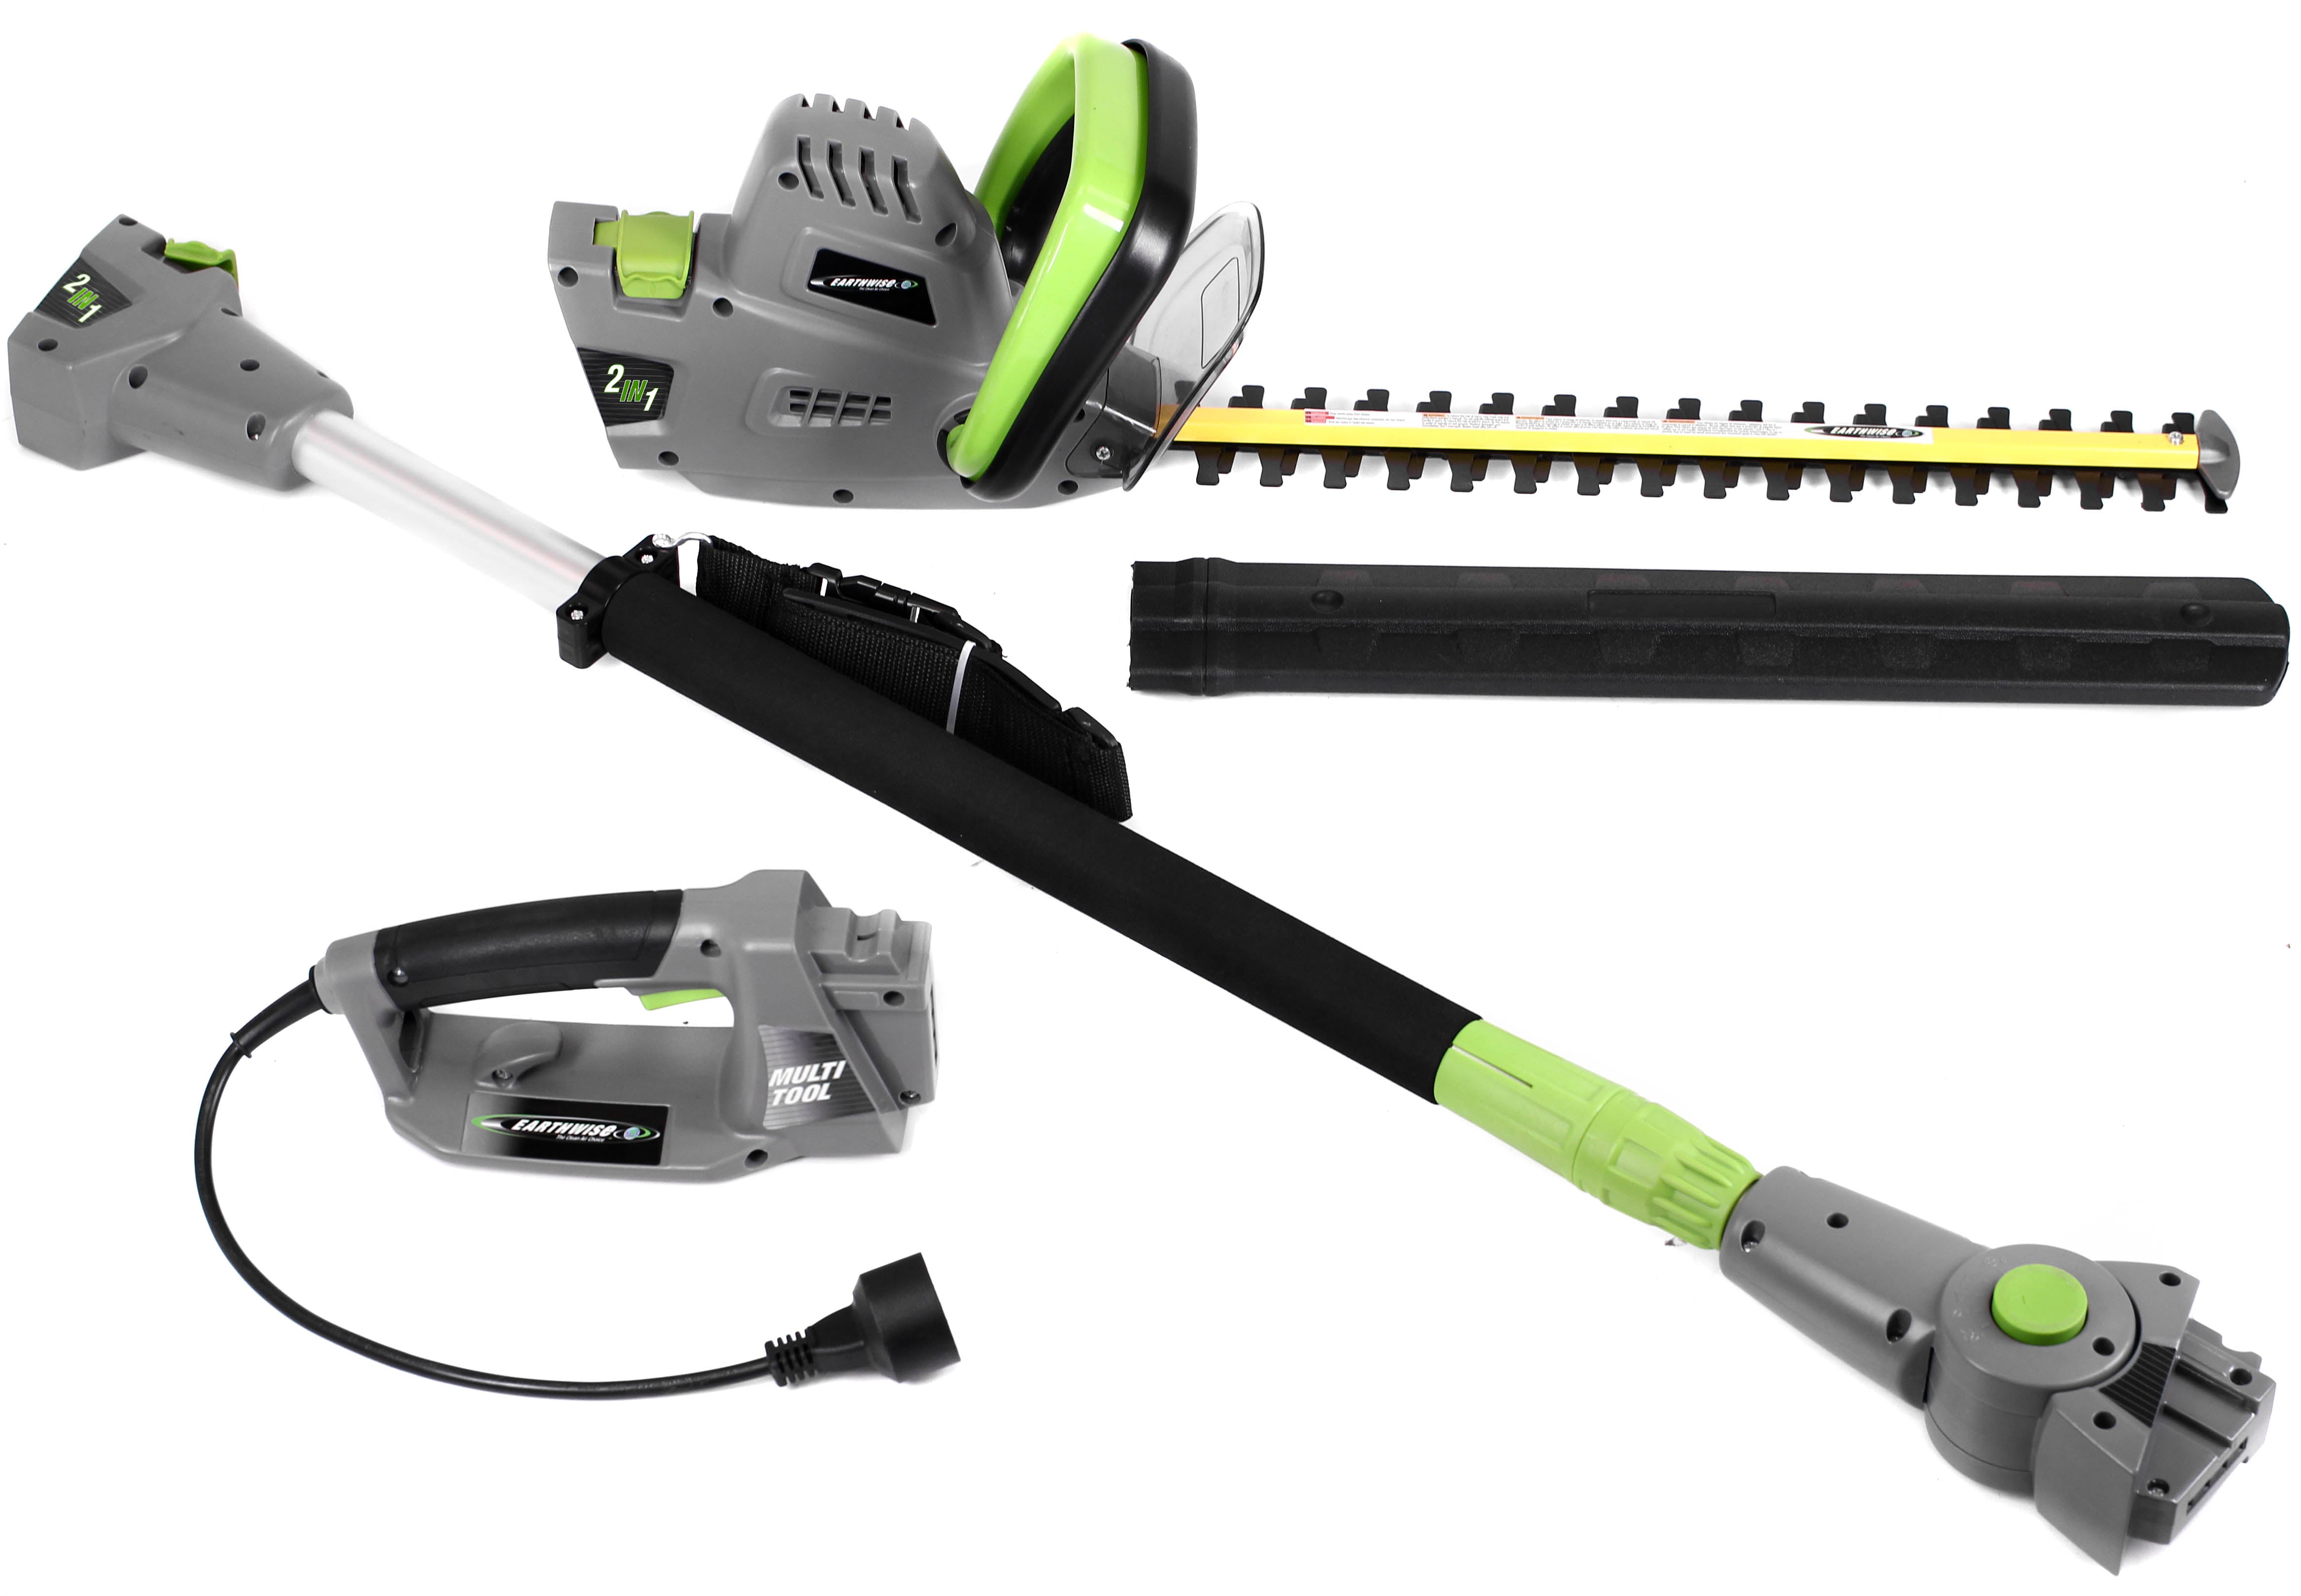 Earthwise Power Tools by ALM 20 20V 2Ah Lithium Hedge Trimmer